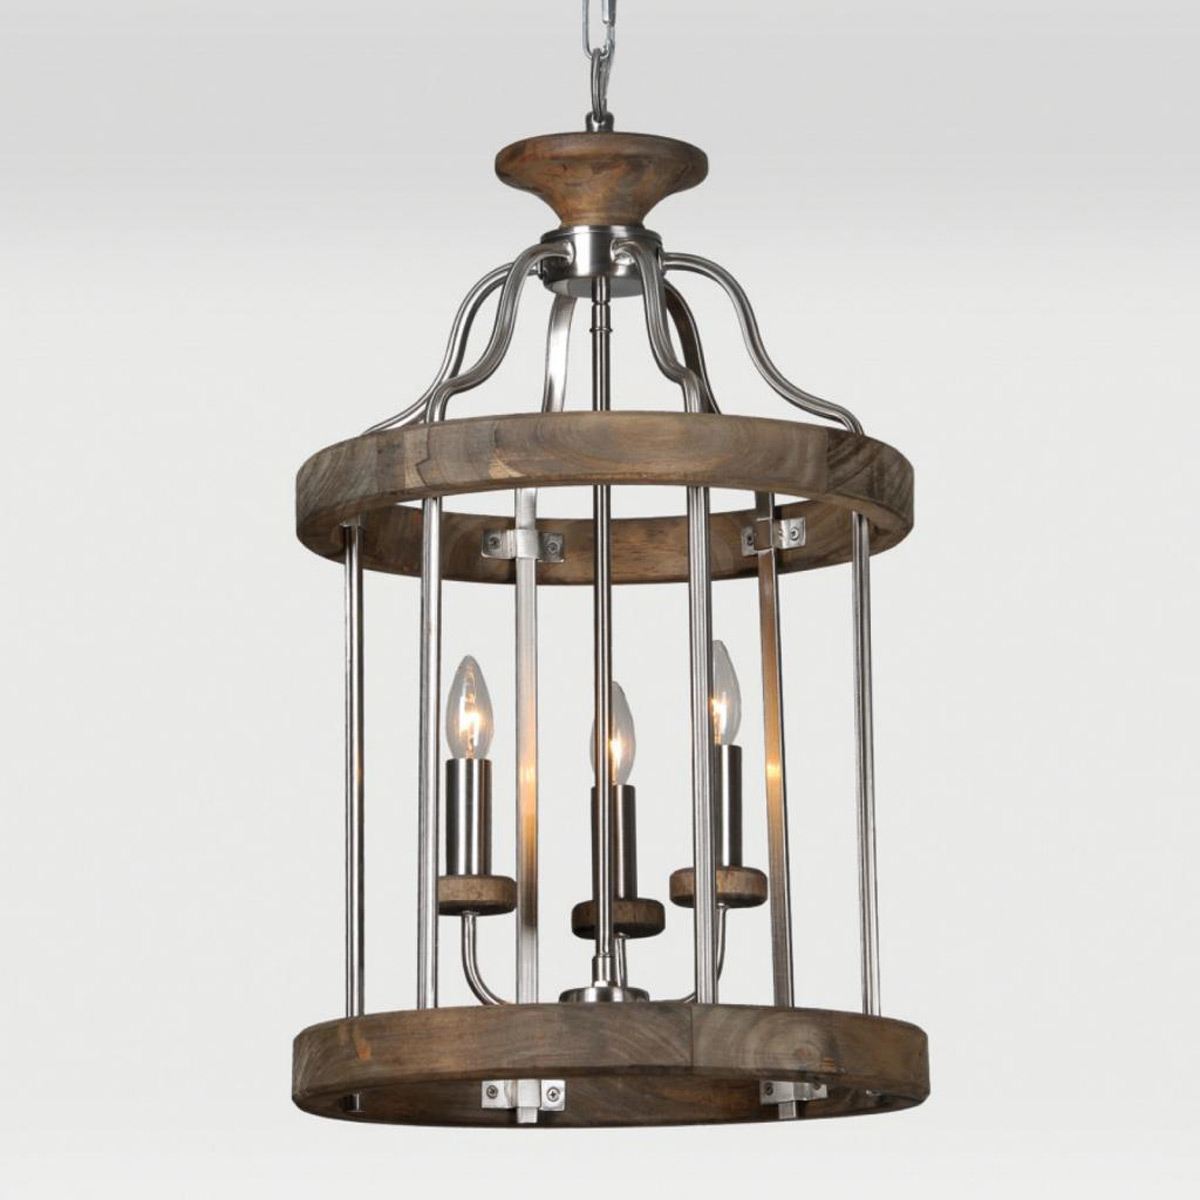 Ren-Wil Pompeii Large Pendant - Unstained Wood With Satin Nickel